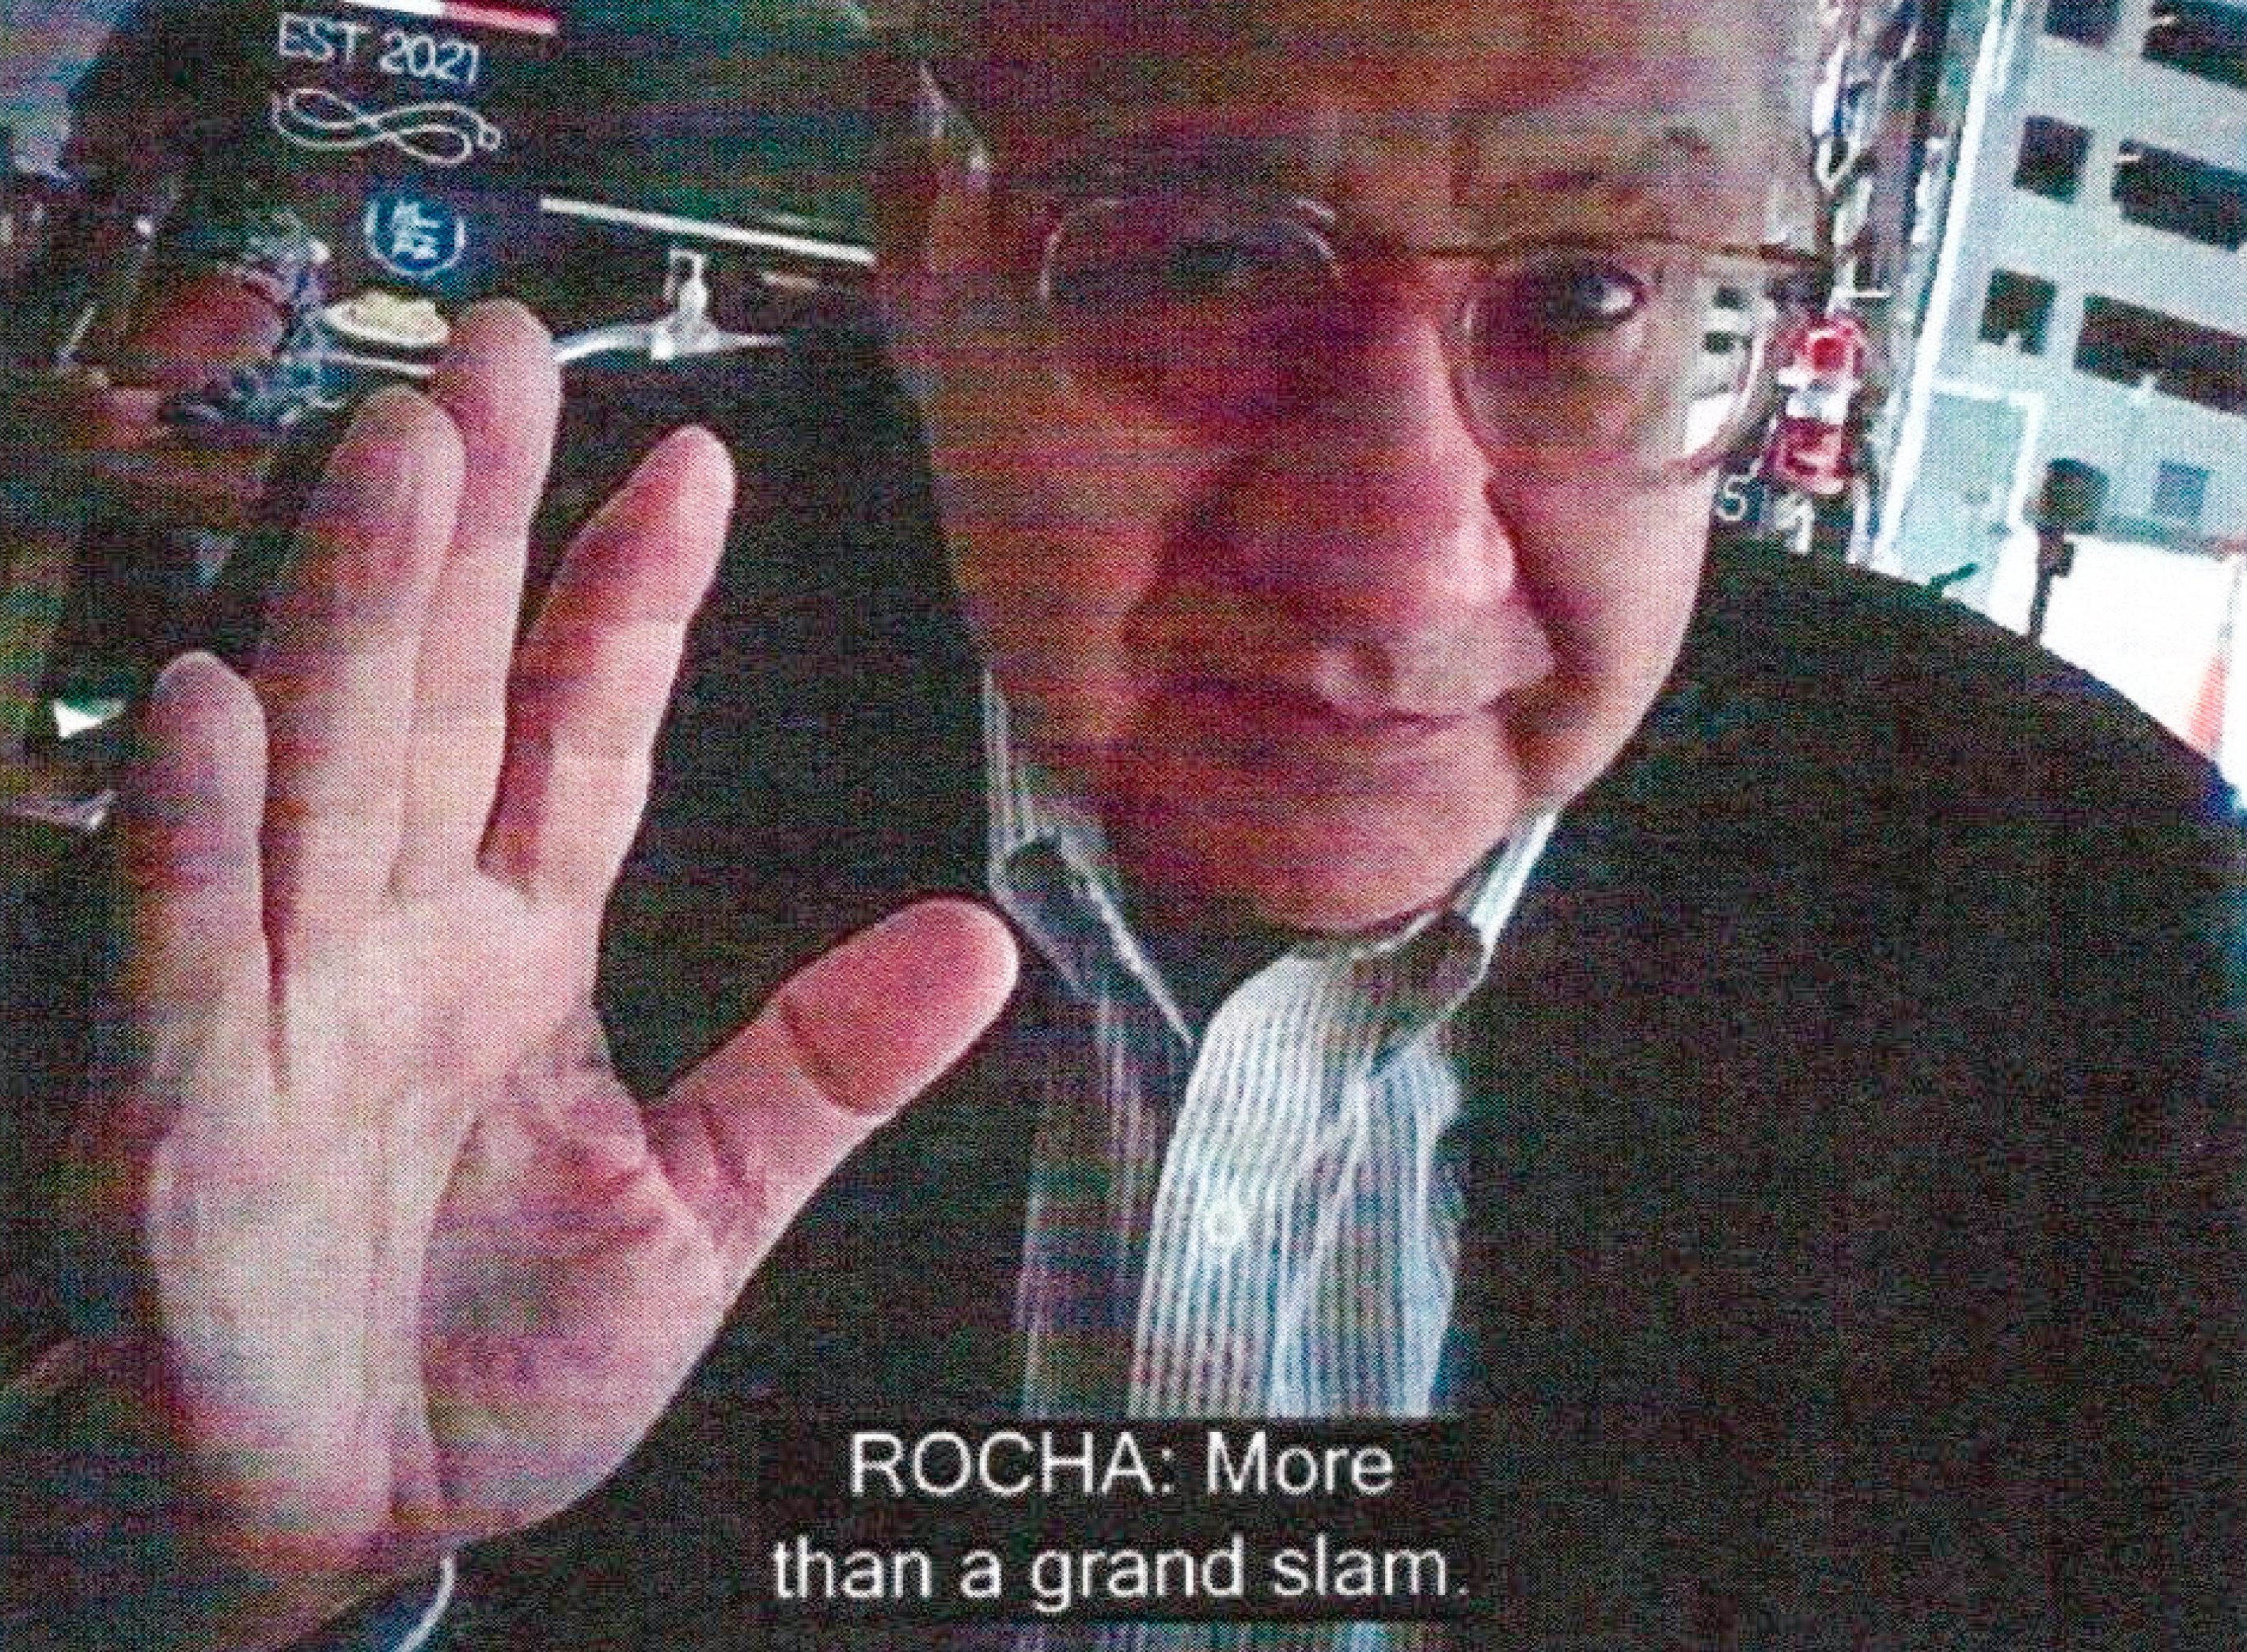 This image provided by the US Justice Department shows Victor Manuel Rocha during a meeting with a FBI undercover agent. Photo: Justice Department via AP